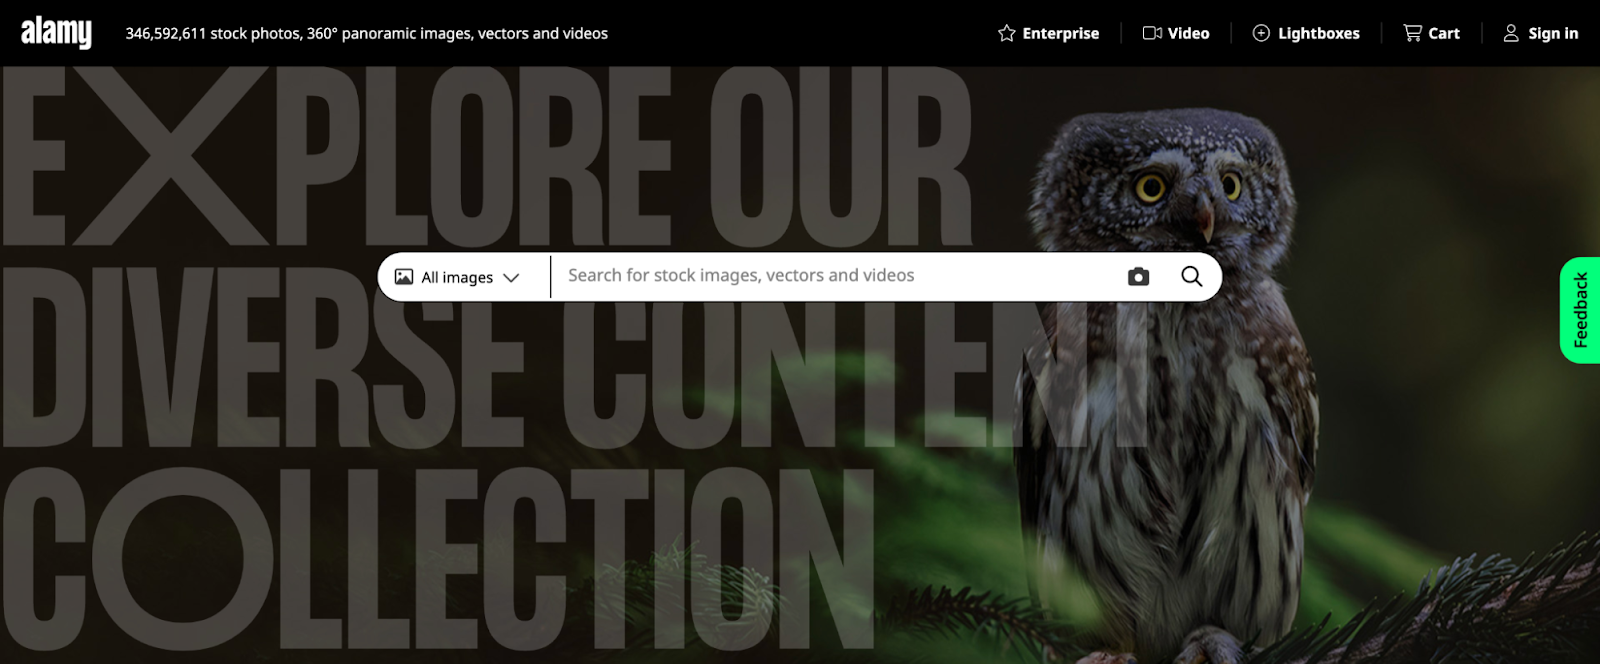 Alamy website with a search bar overlaid on a composite image of promotional text and an owl.